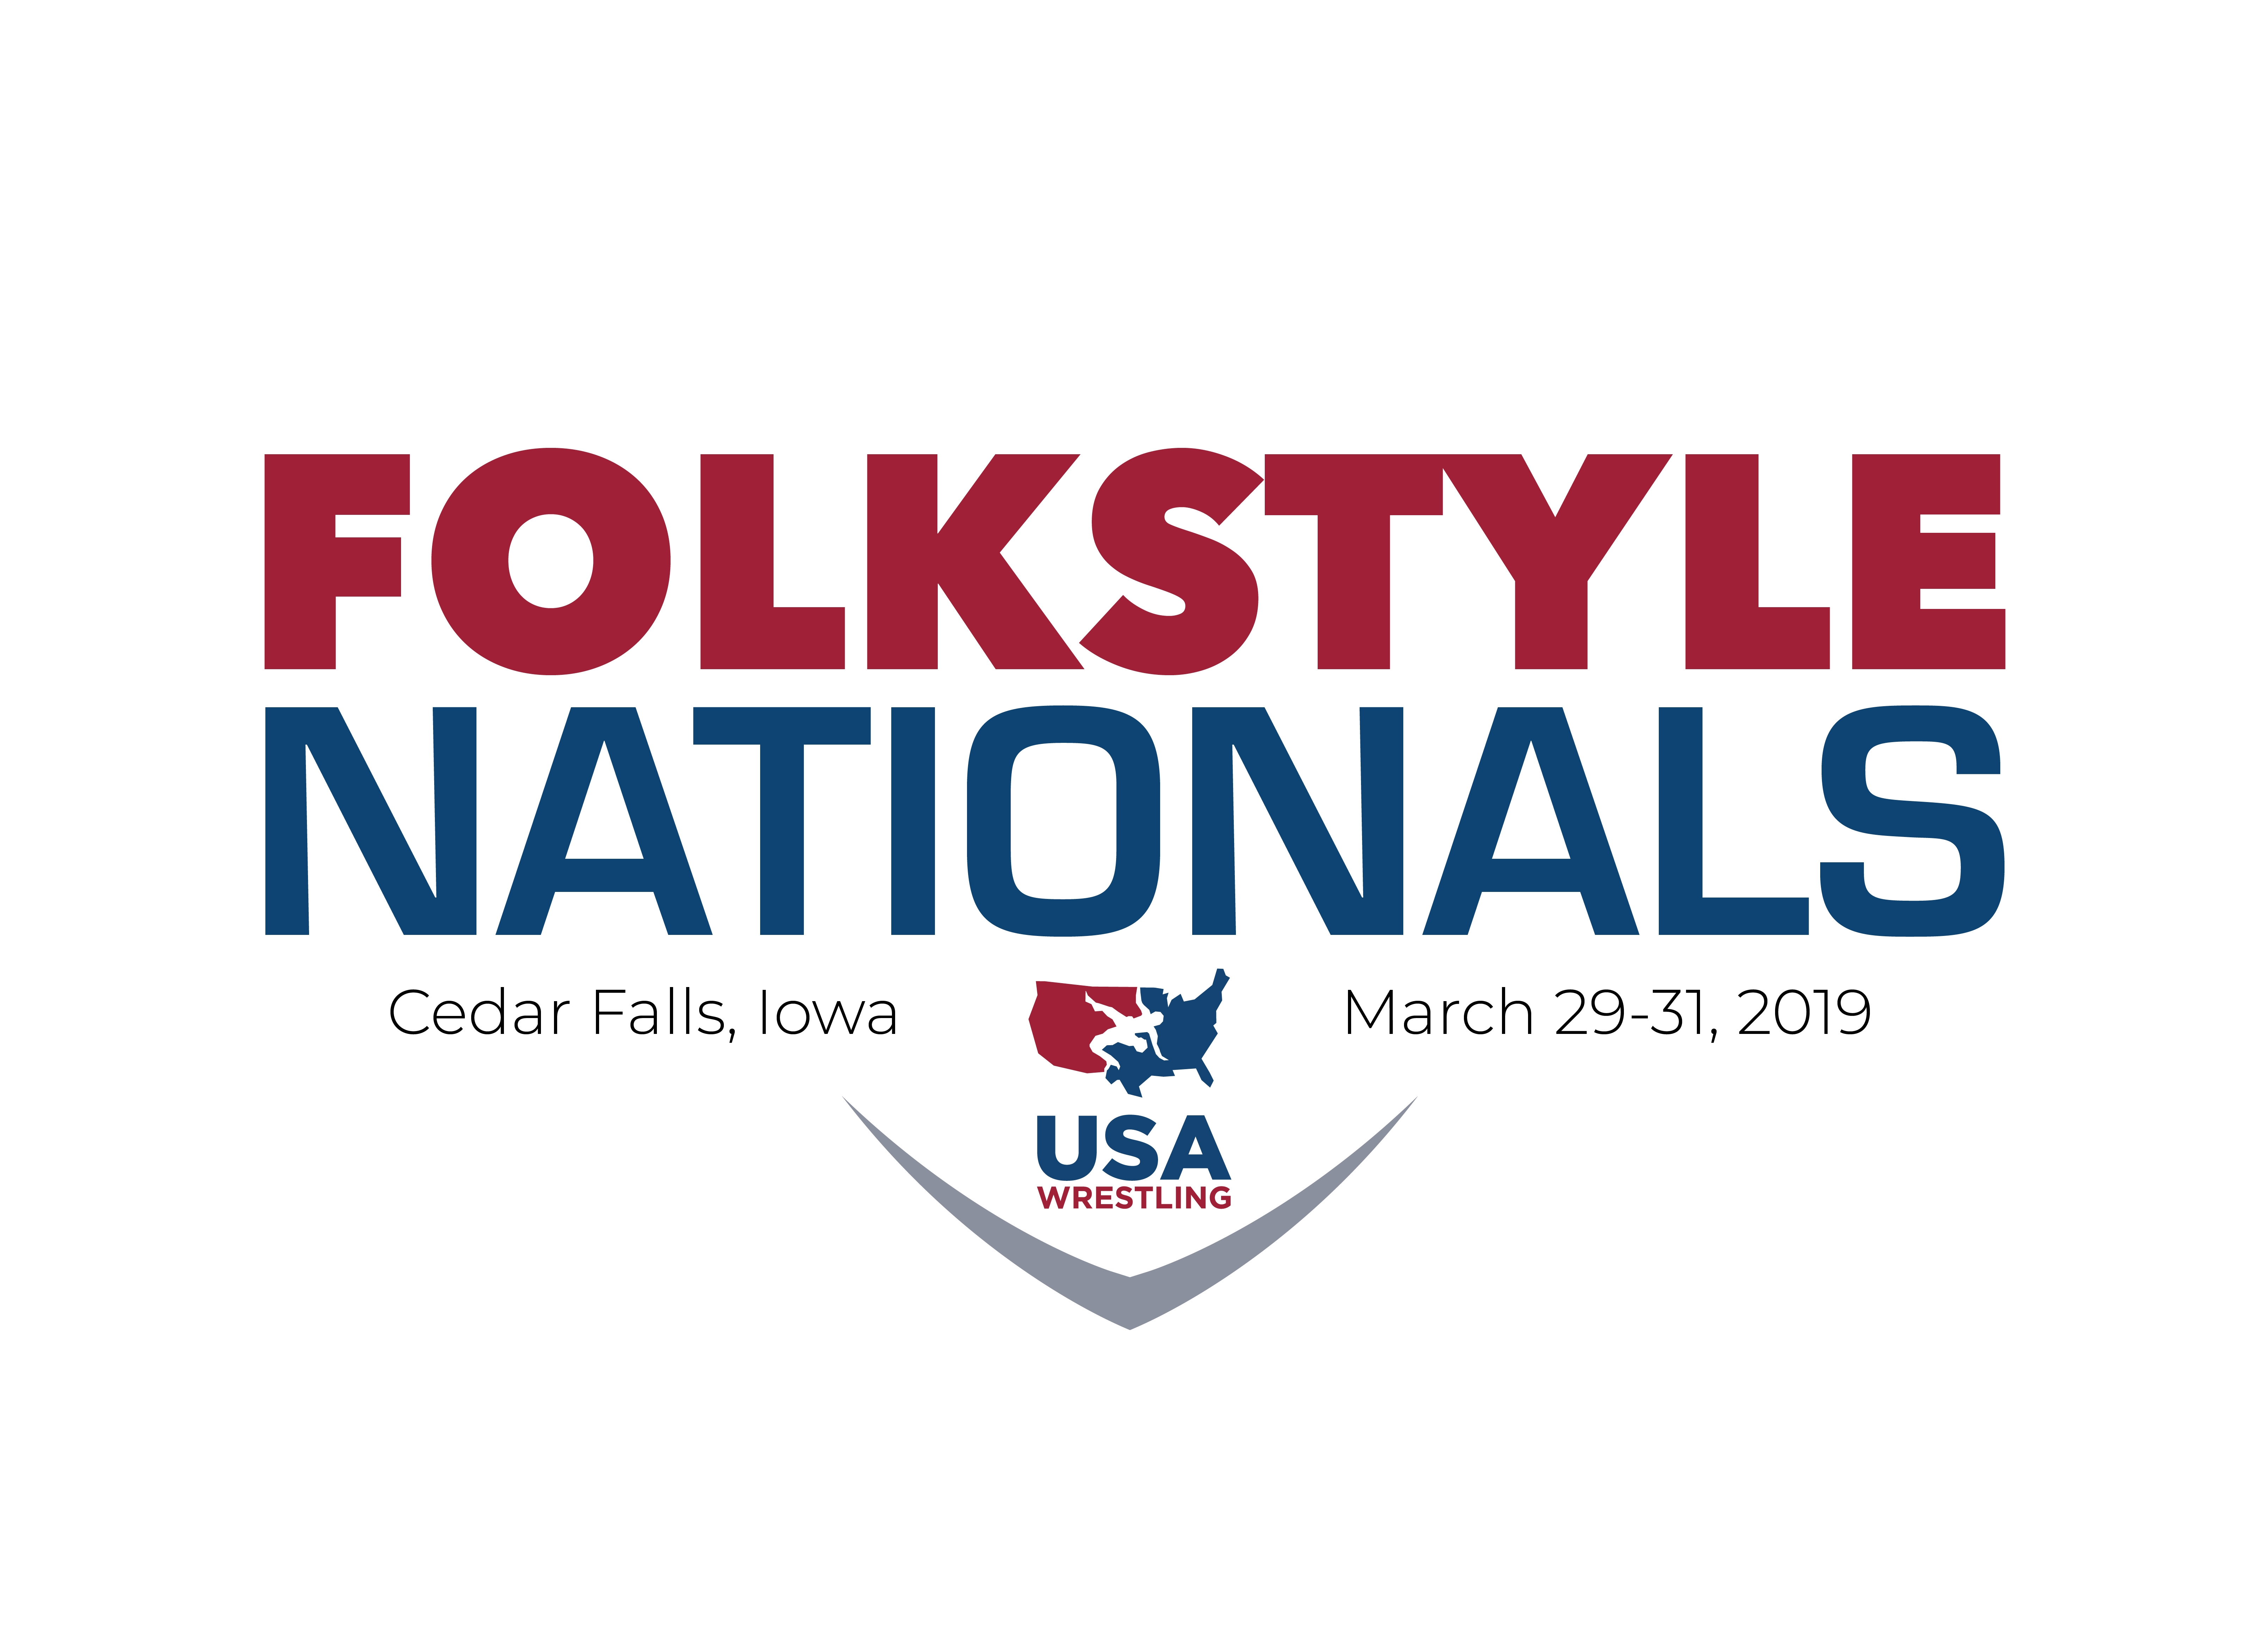 2021 USAW Folkstyle National Entries from Indiana High School News